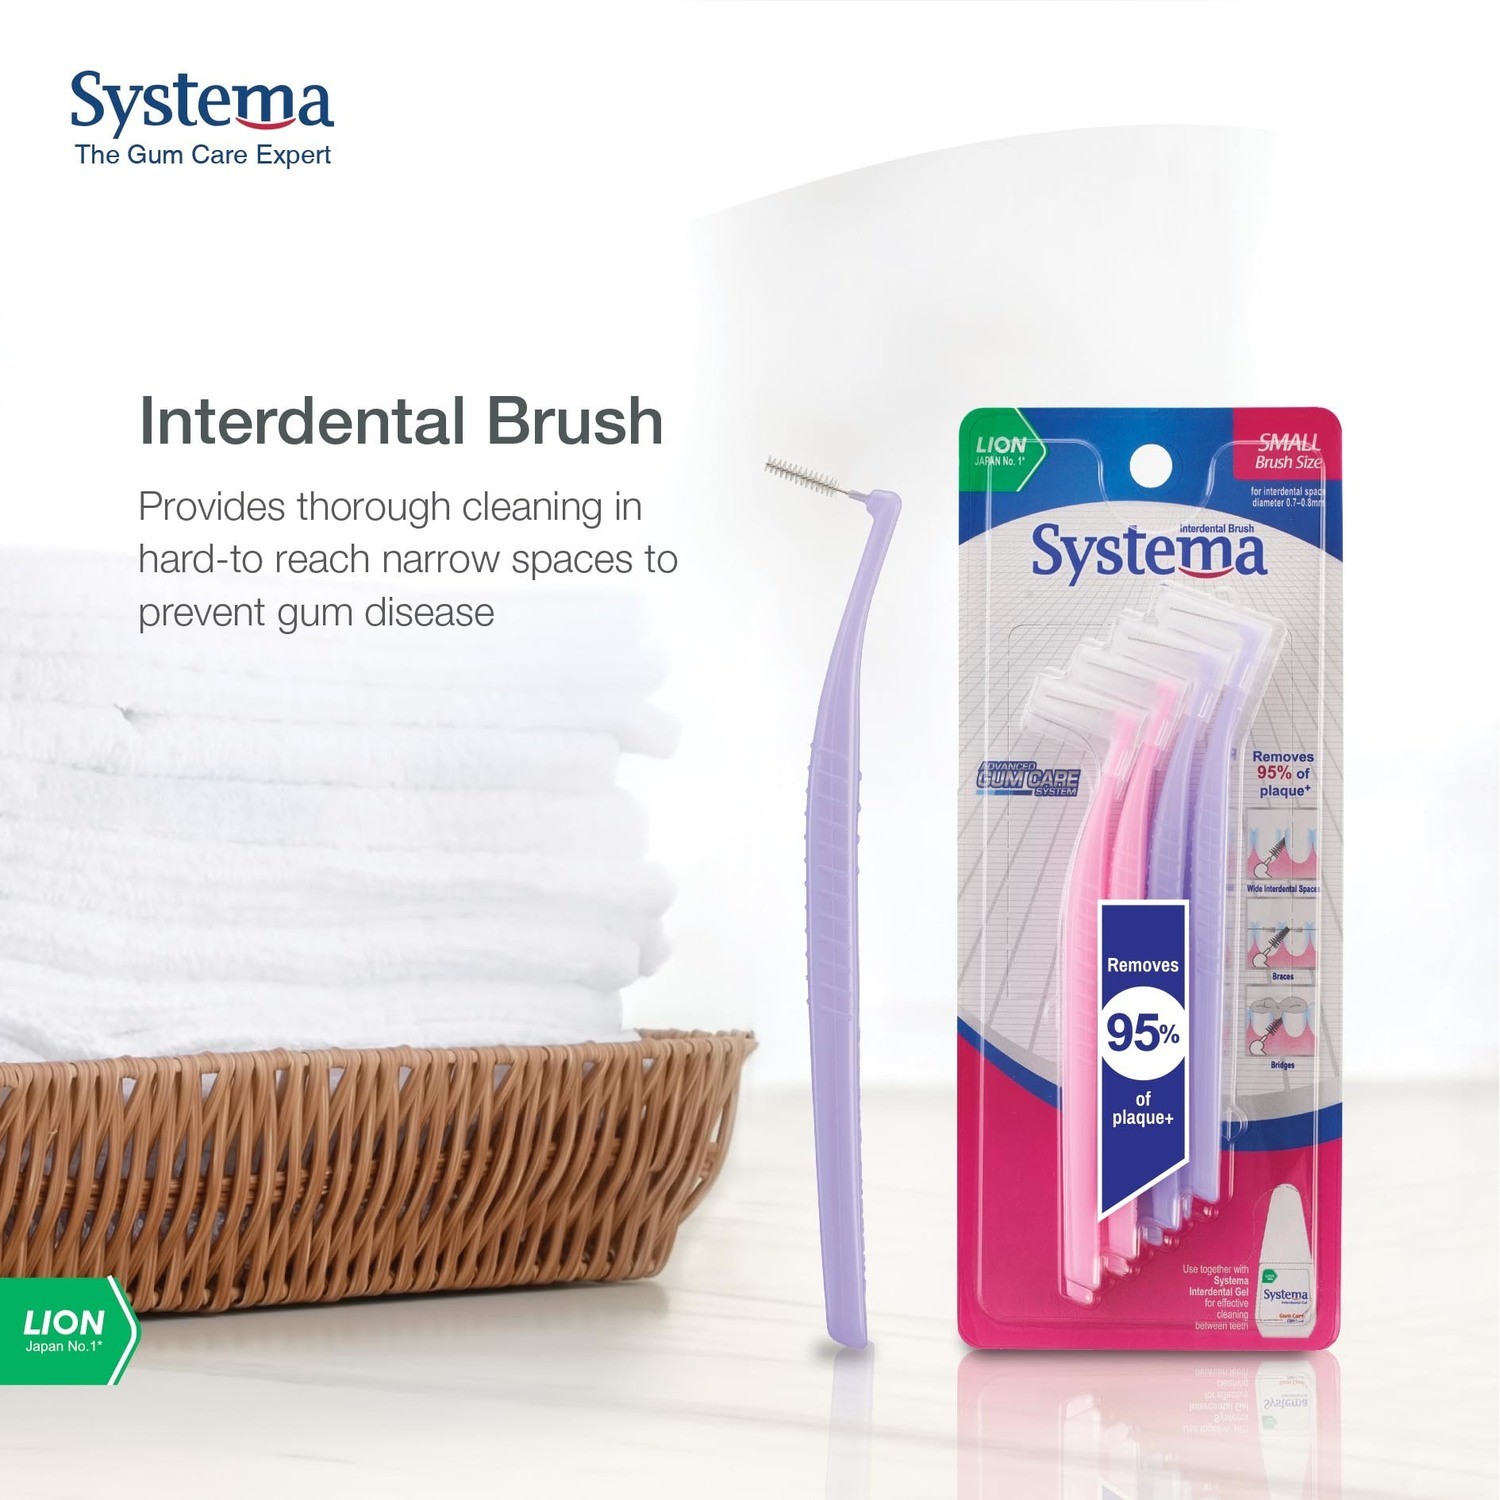 SYSTEMA INTERDENTAL BRUSHES
TWO (2) PACKETS for $14.95